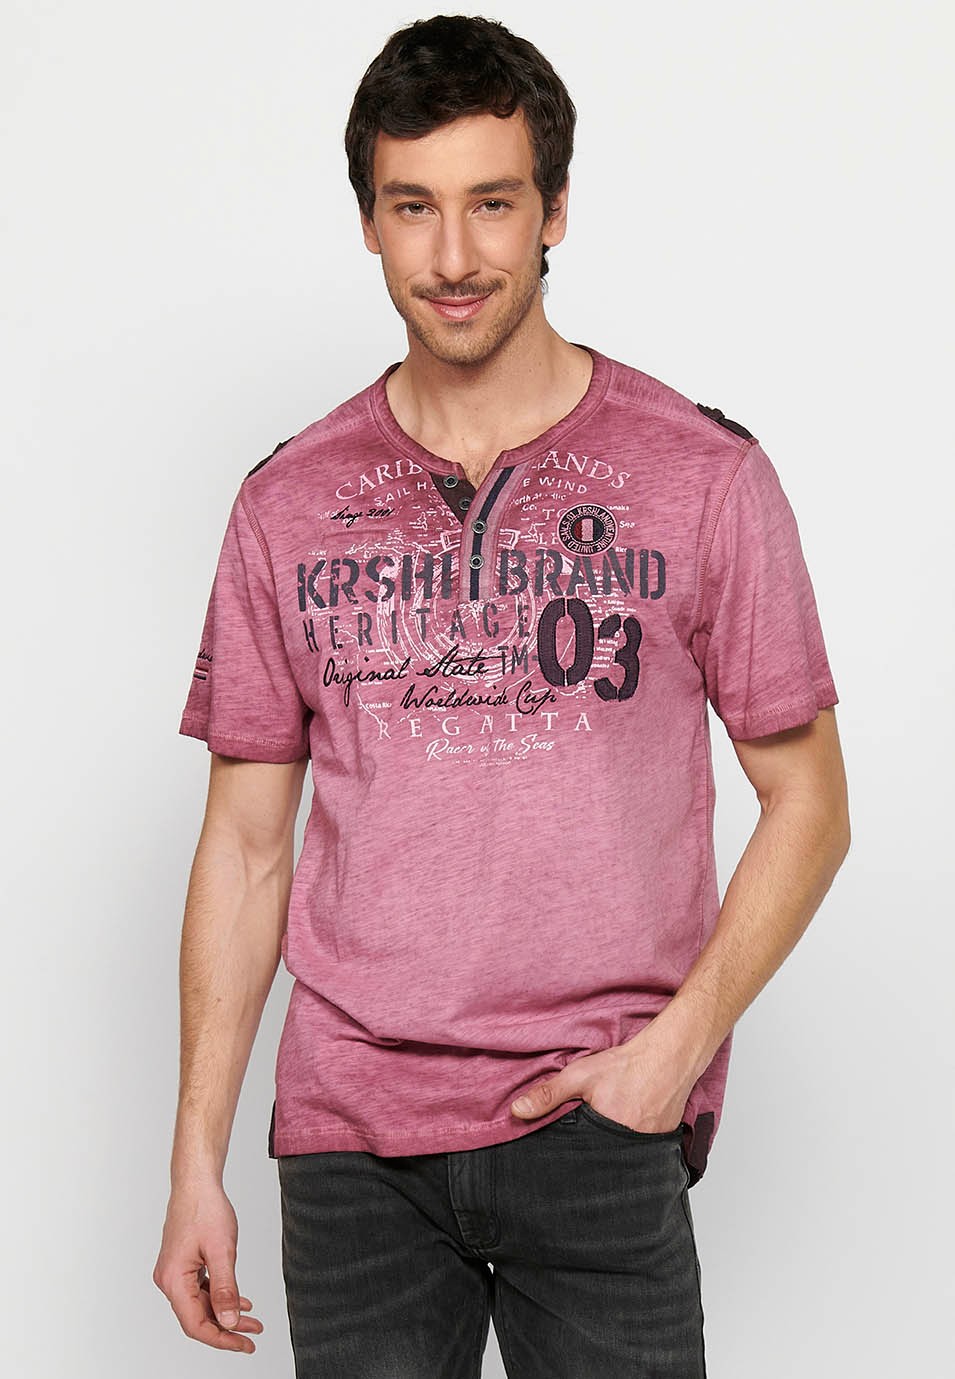 Men's Short Sleeve Cotton T-Shirt with Round Neck with Buttoned Opening and Maroon Color Front Detail